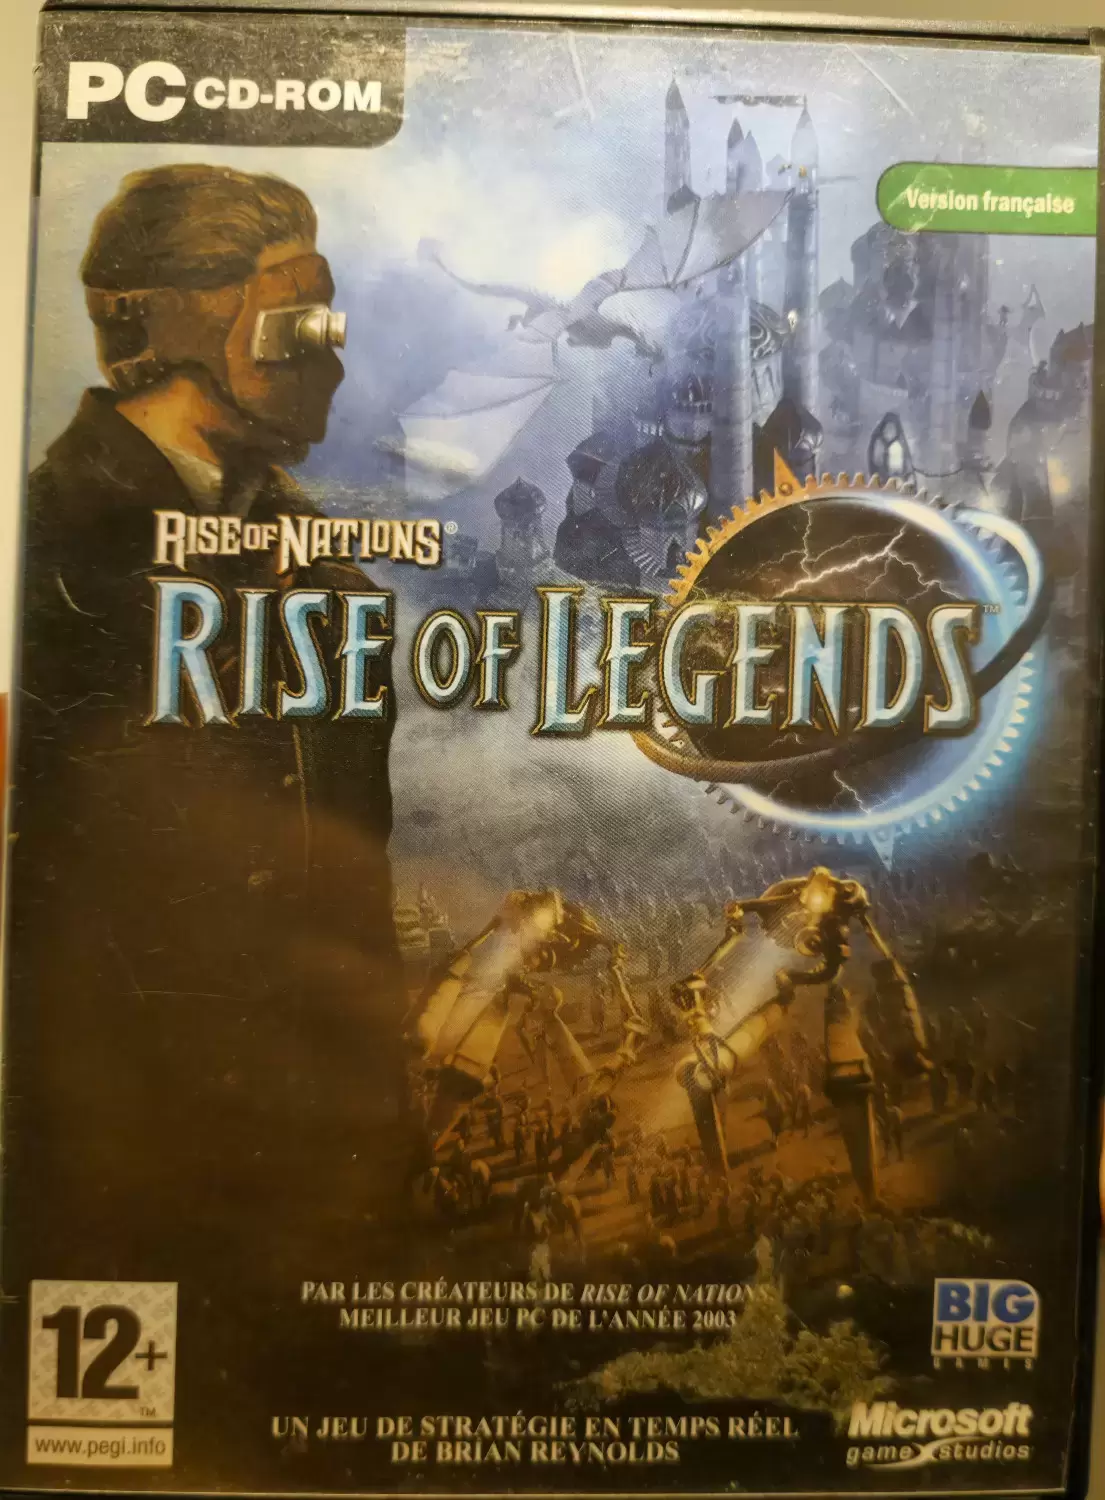 Rise Of Nations: Rise Of Legends - Pc 